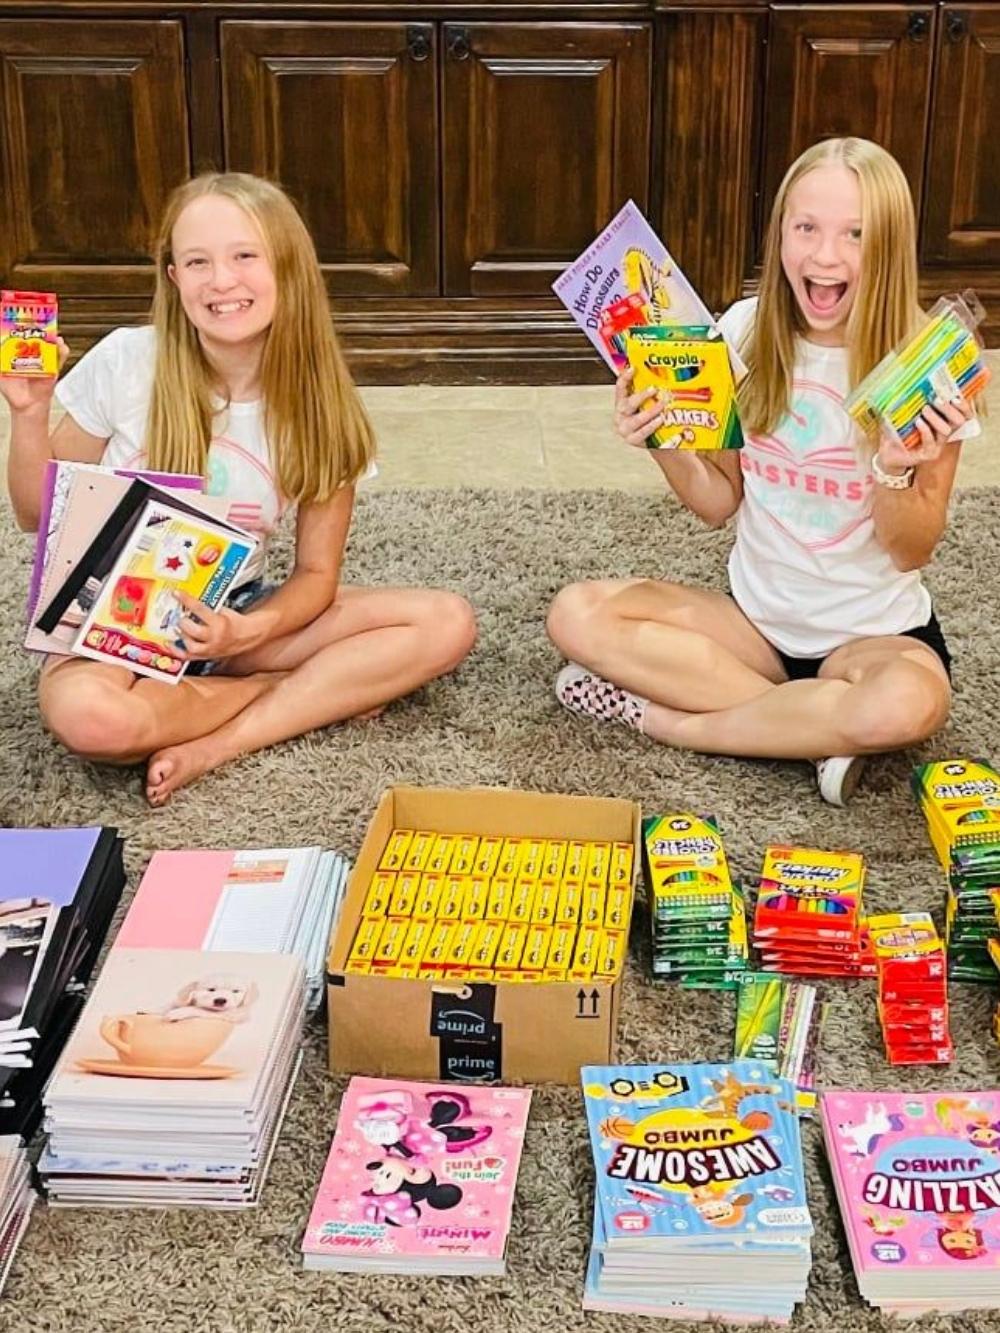 Meet Ally and Lizzy.  Girl entrepreneurs and founder of the non-profit, Sisters 4 Kids that works to ensure every child has art supplies and at least one book. 